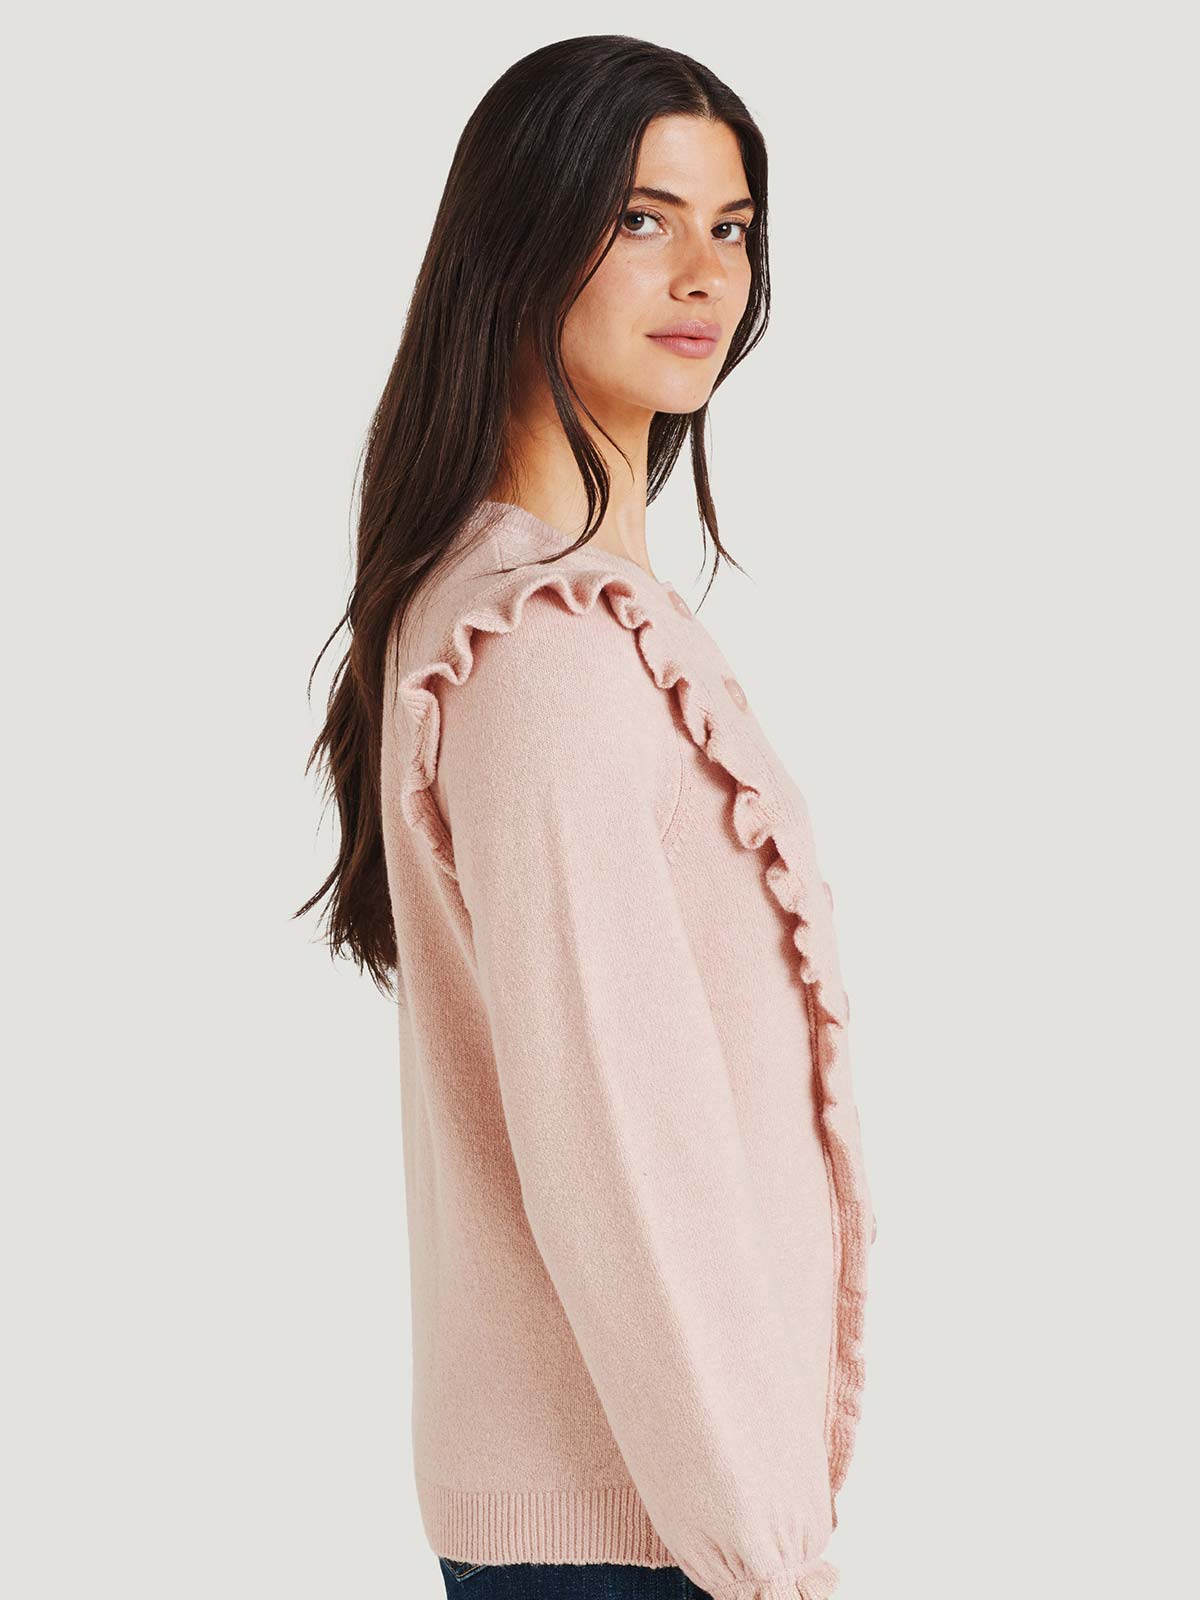 Aguilar Organic Cotton Fluffy Cardigan - Faded Rose Pink